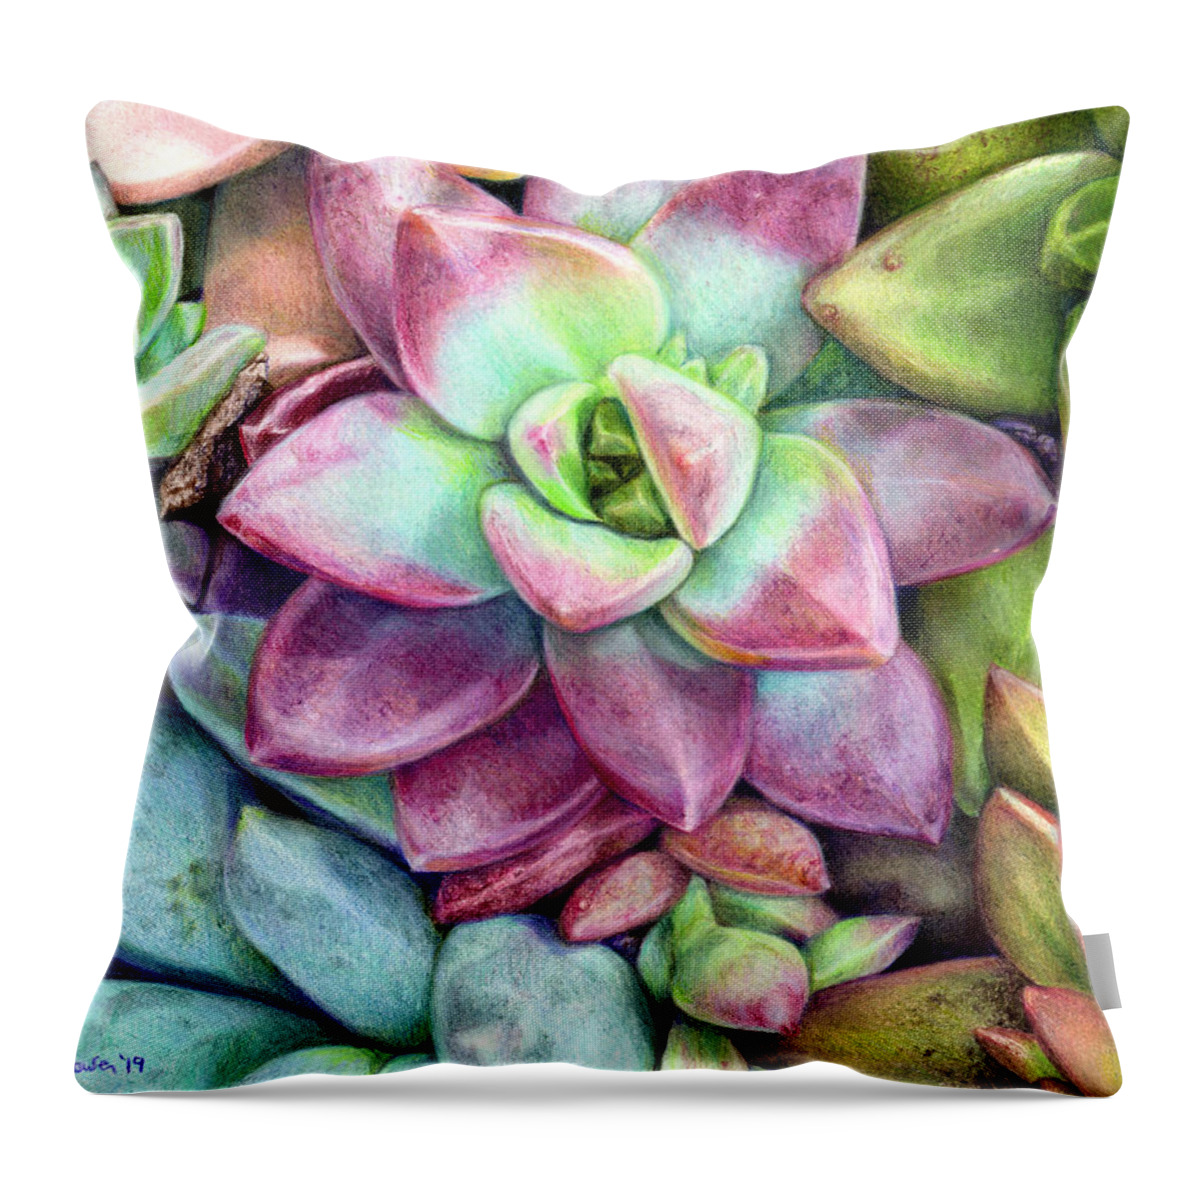 Succulent Throw Pillow featuring the drawing Succulent Succulents by Shana Rowe Jackson